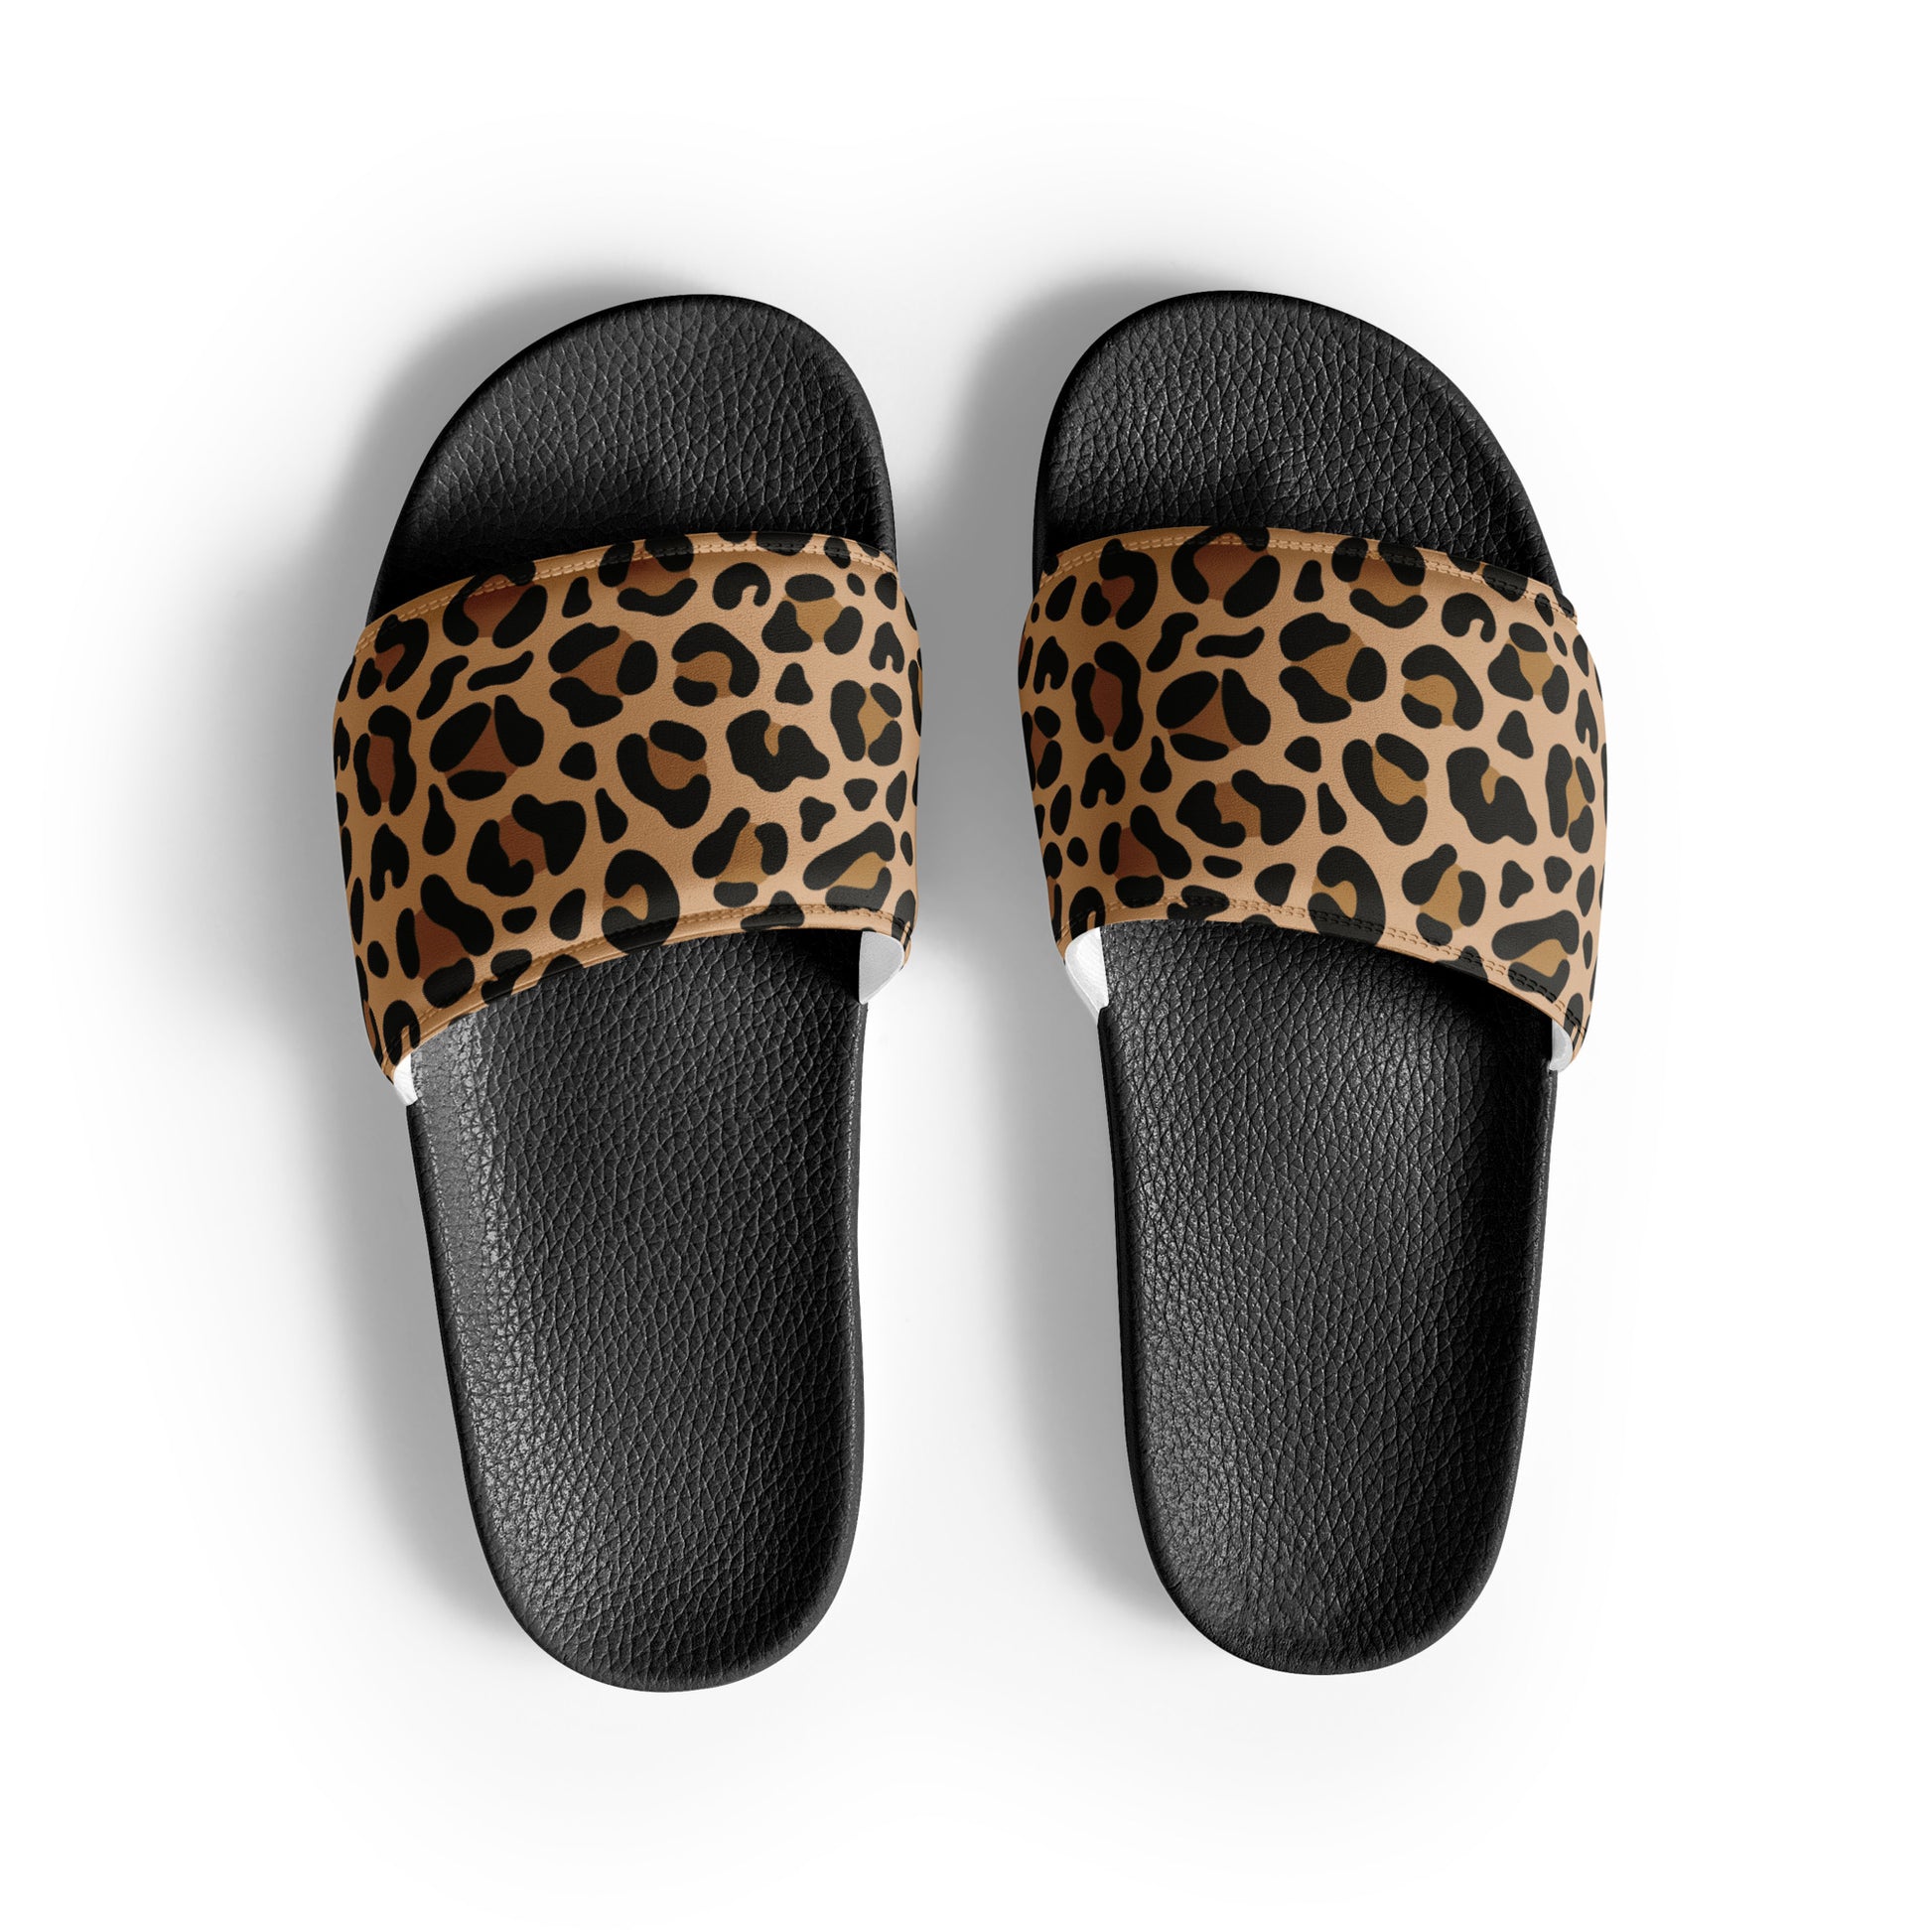 Women's Leopard Print Slides - Trendy and Comfortable Slip-Ons